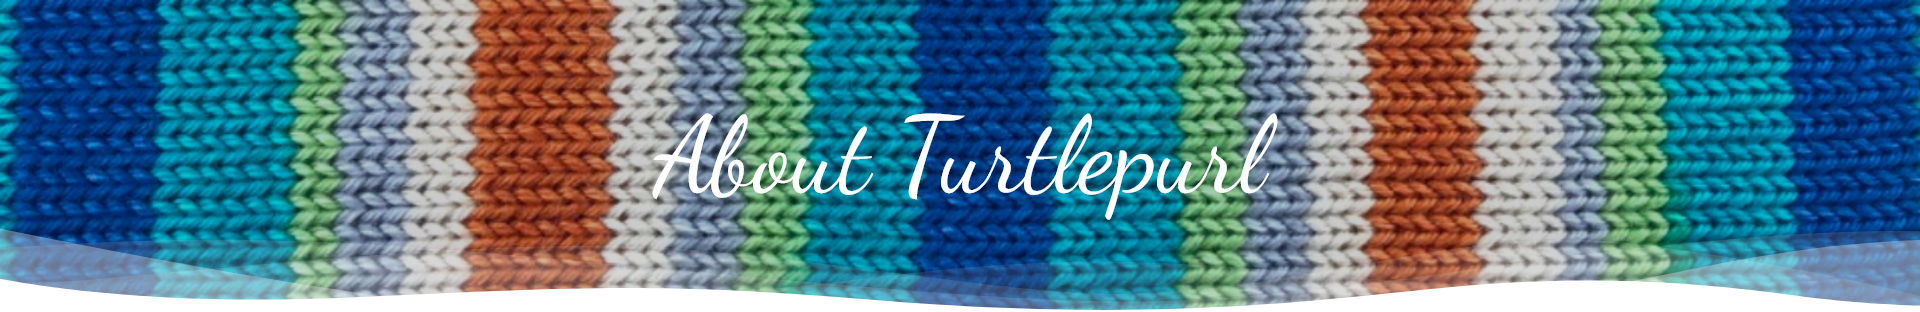 About turtlepurl banner